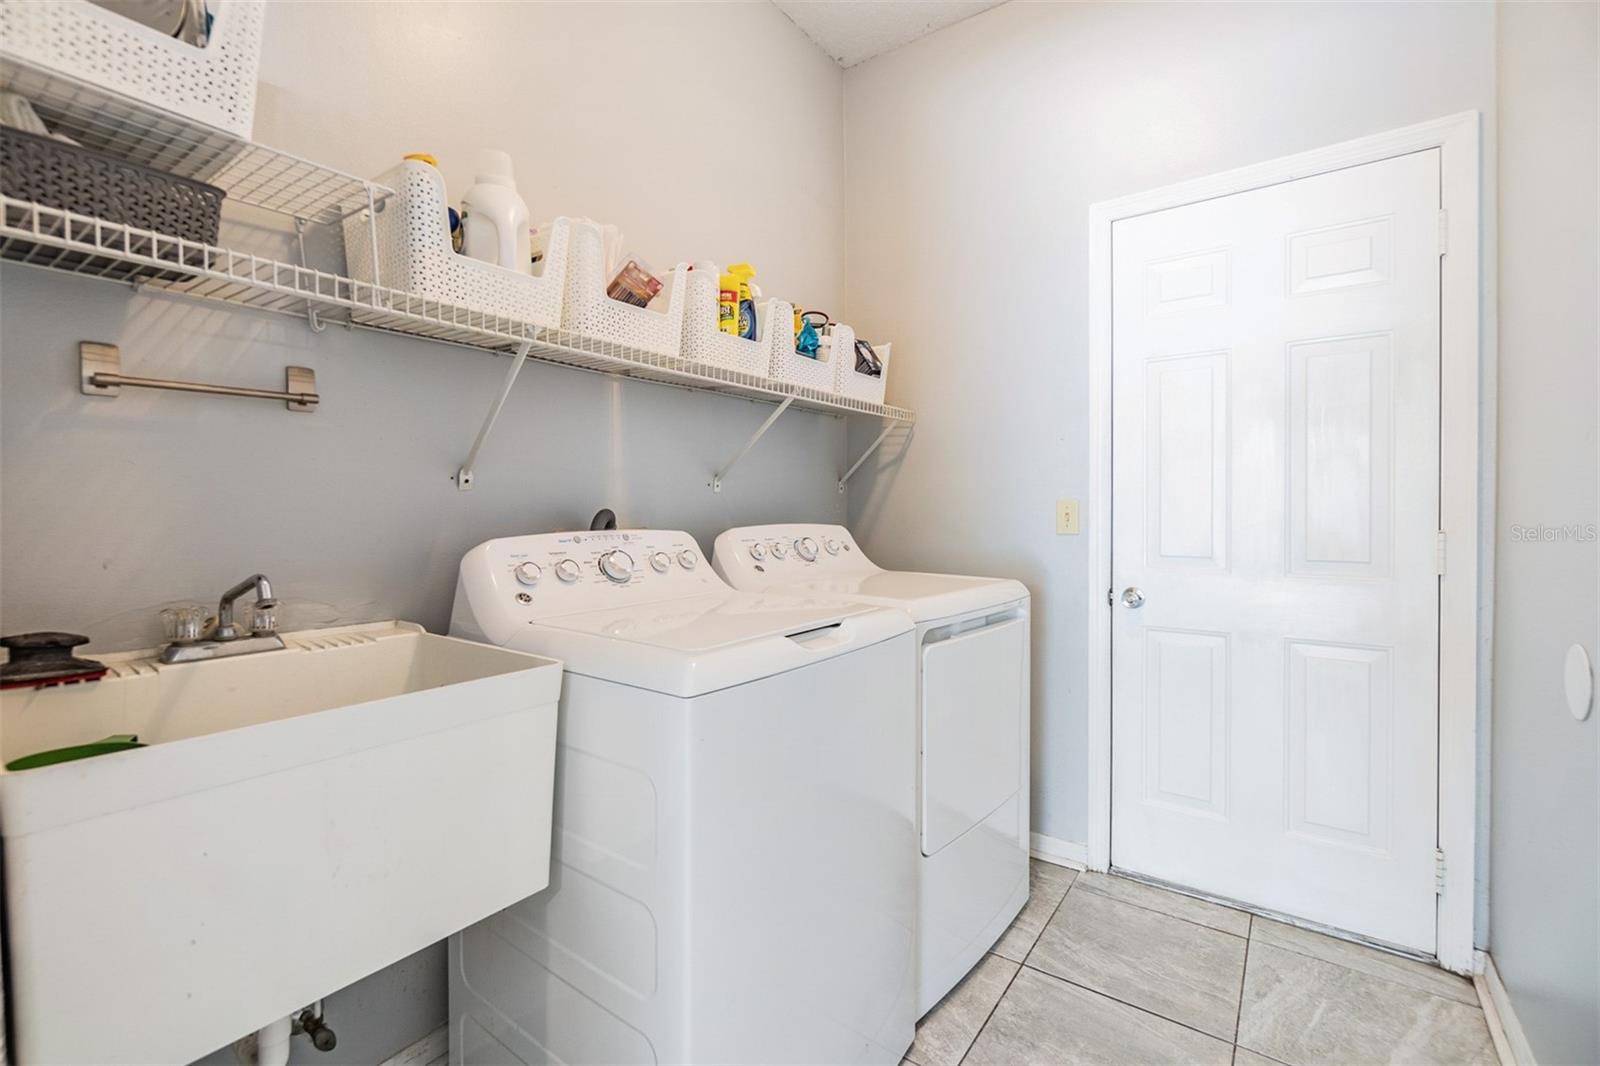 Laundry Room and utility sink, just off of the kitchen area